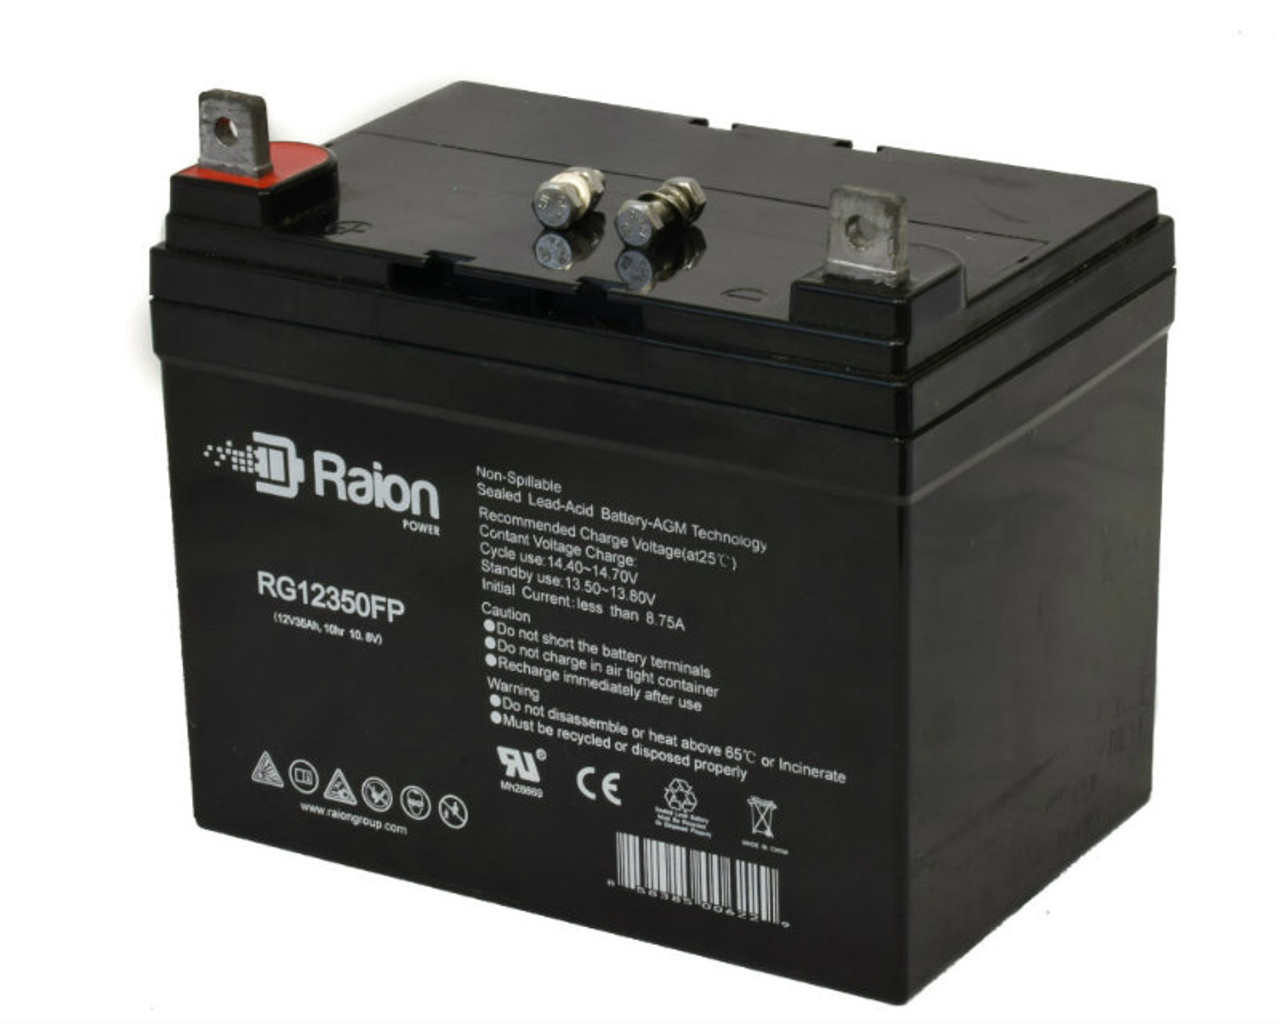 Raion Power Replacement 12V 35Ah RG12350FP Mobility Scooter Battery for Drive Medical Design Trident Scooter